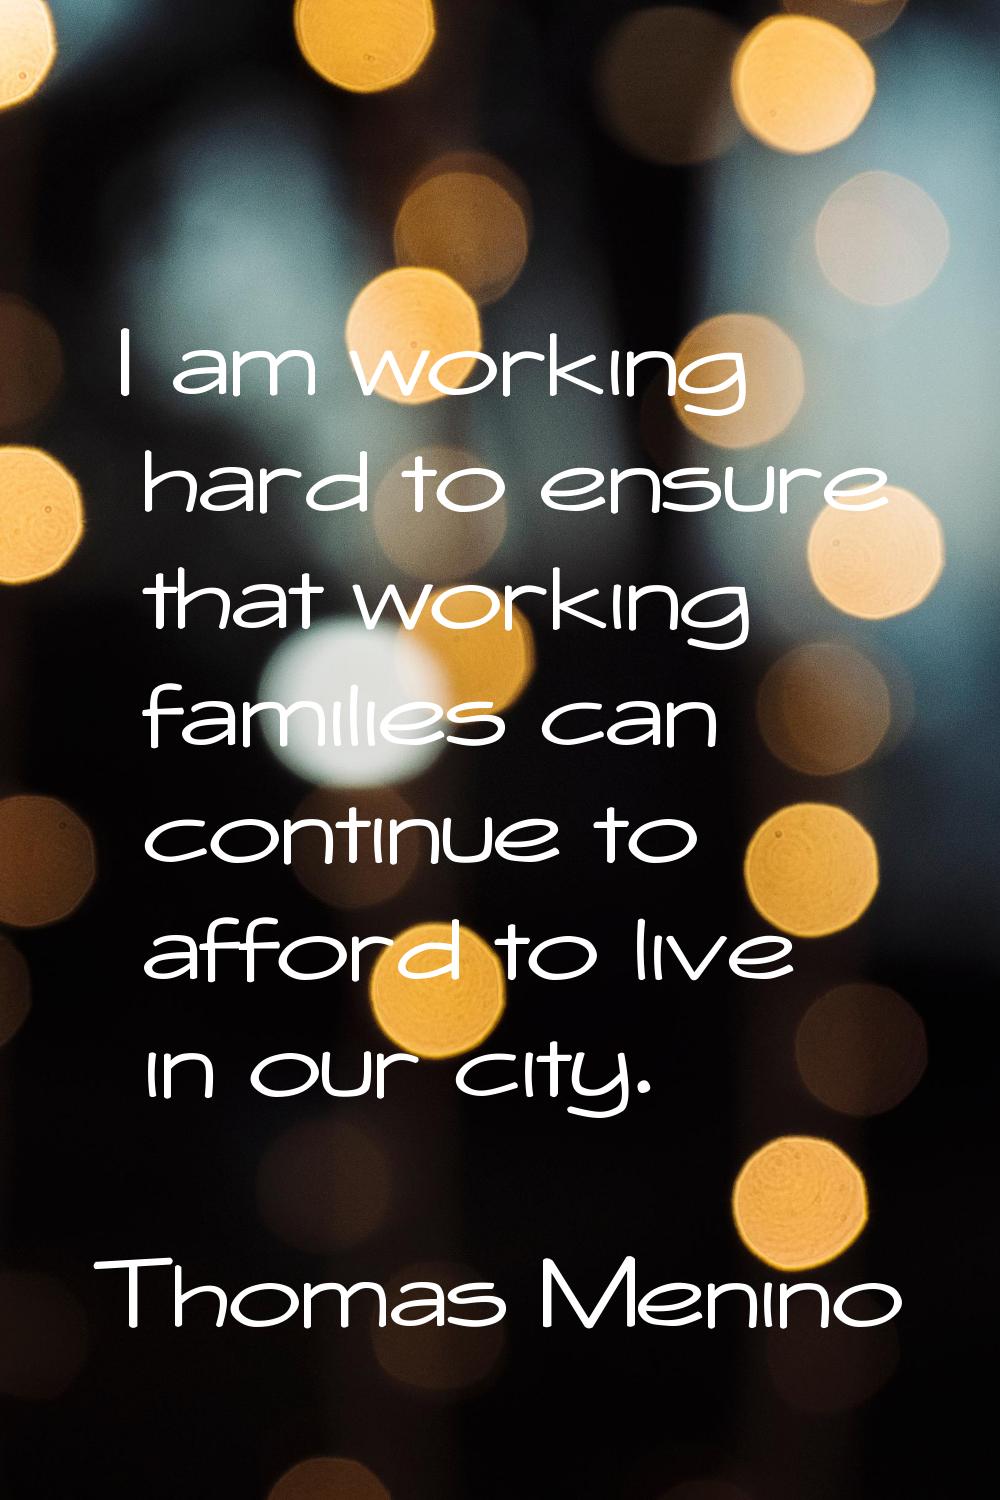 I am working hard to ensure that working families can continue to afford to live in our city.